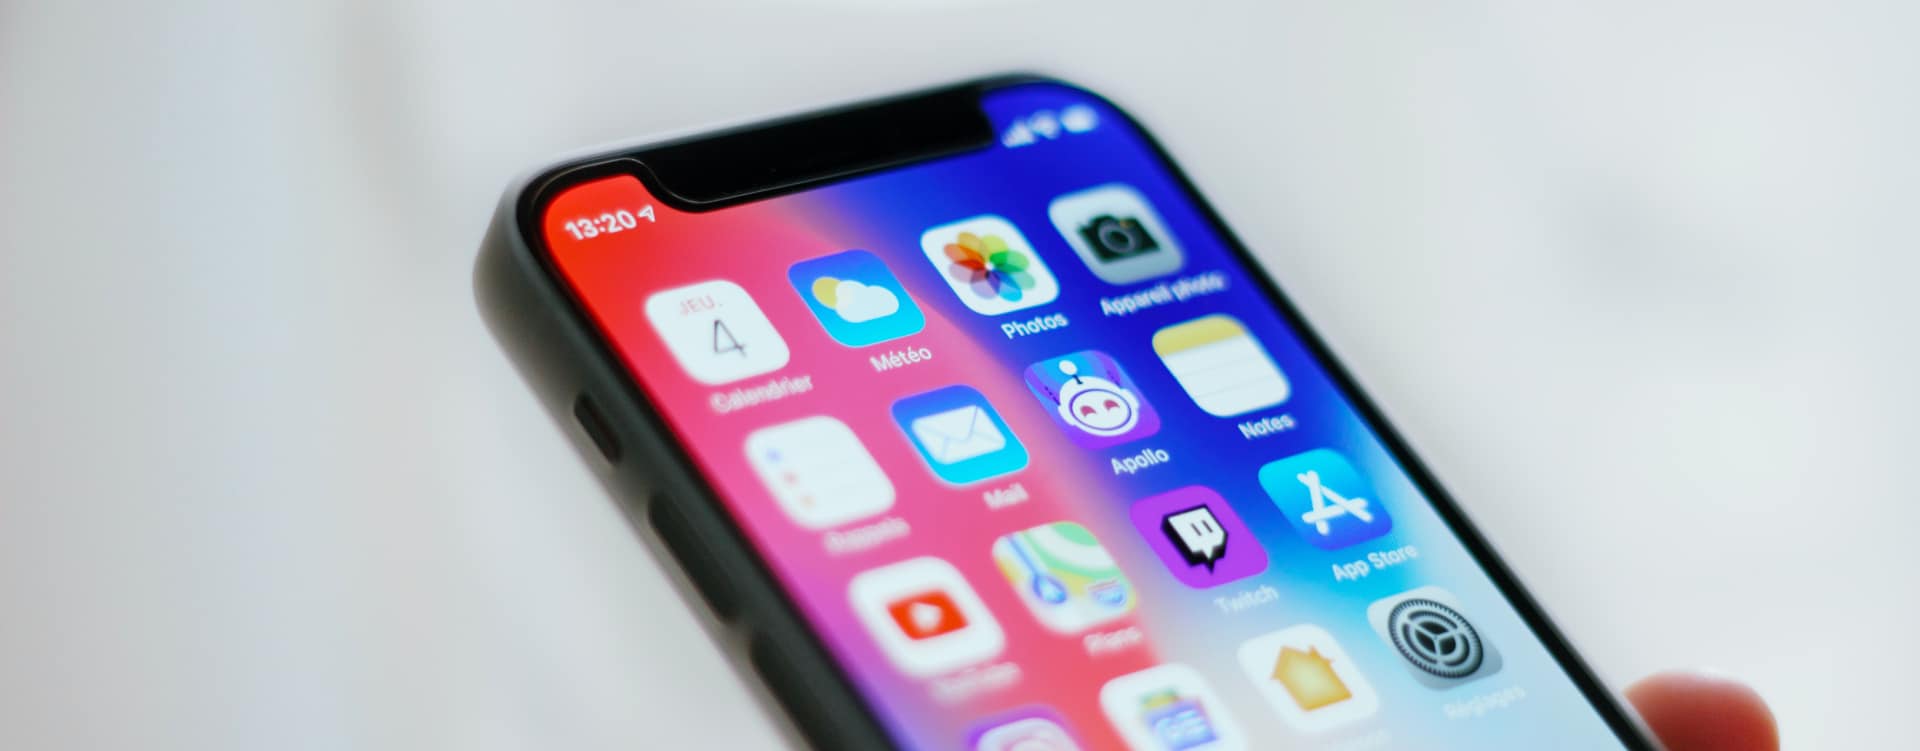 Download Cowabunga Jailbreak Alternative for iOS 15.0 up to iOS 16.1.2 on All Devices